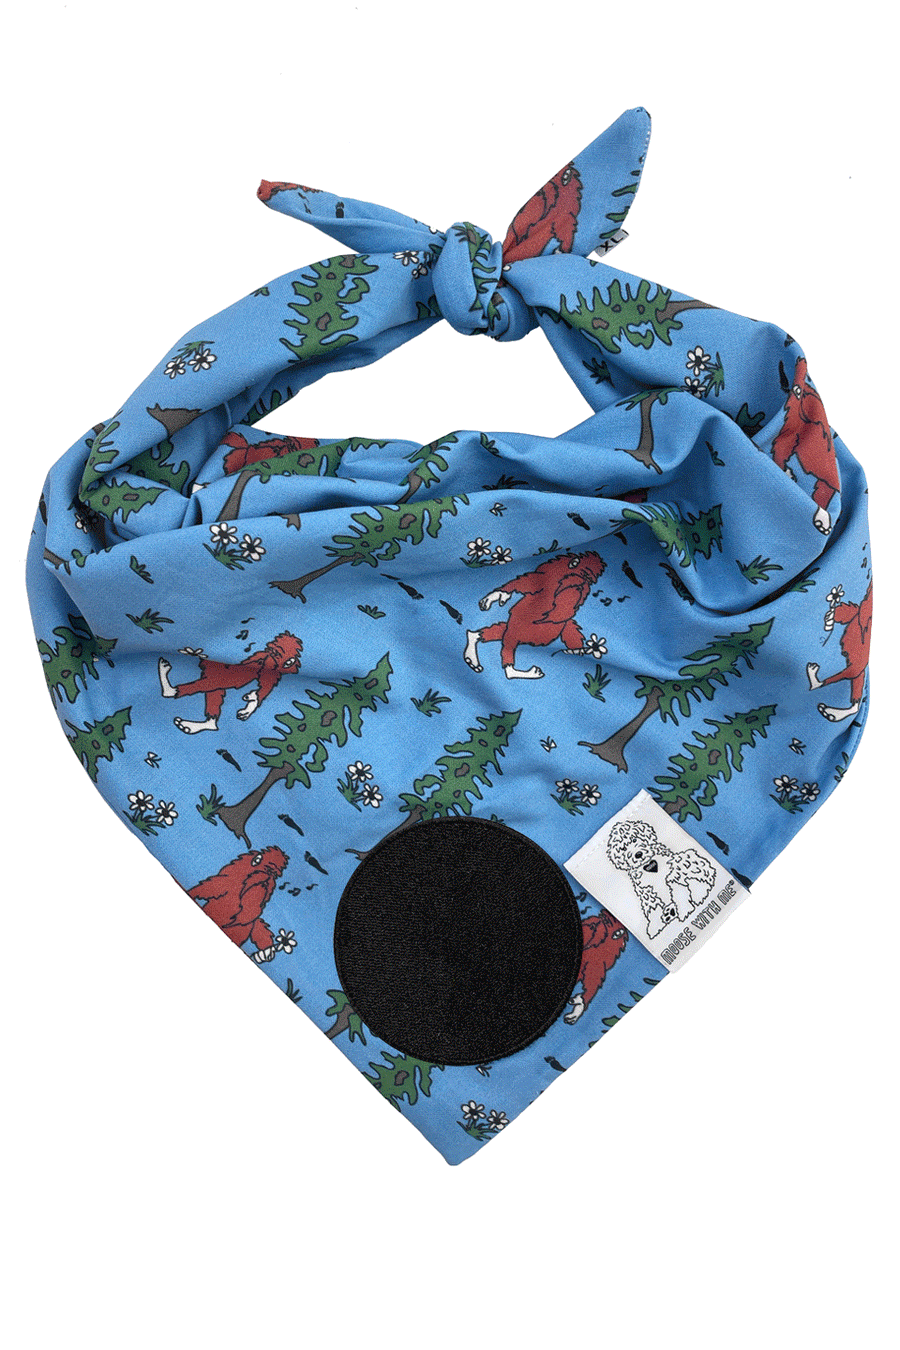 Dog Bandana Big Foot - Customize with Interchangeable Velcro Patches